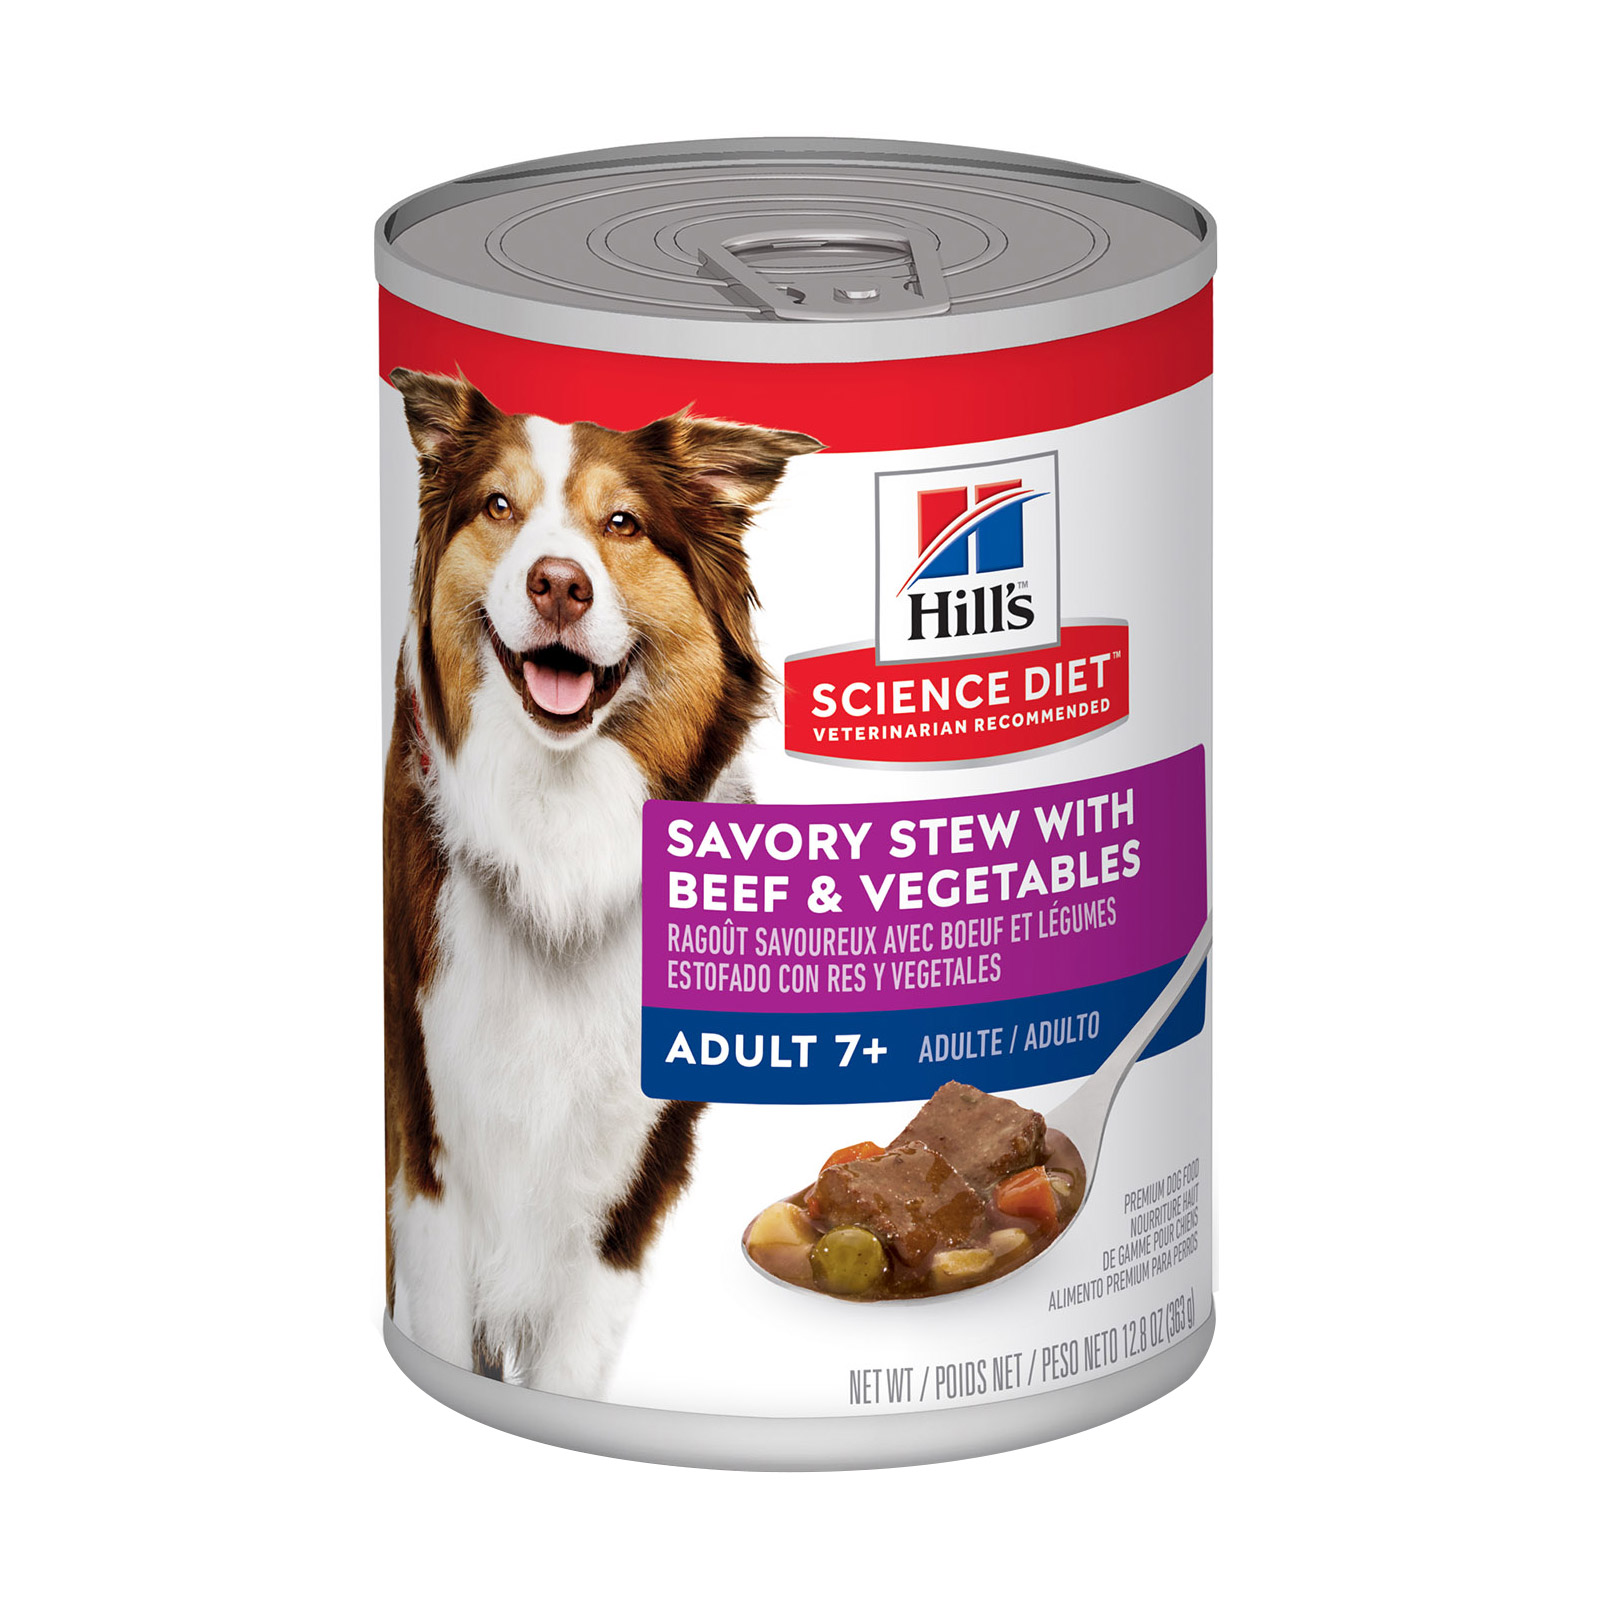 Hill's Science Diet Adult 7+ Savory Stew Beef & Vegetable Canned Dog Food for Food